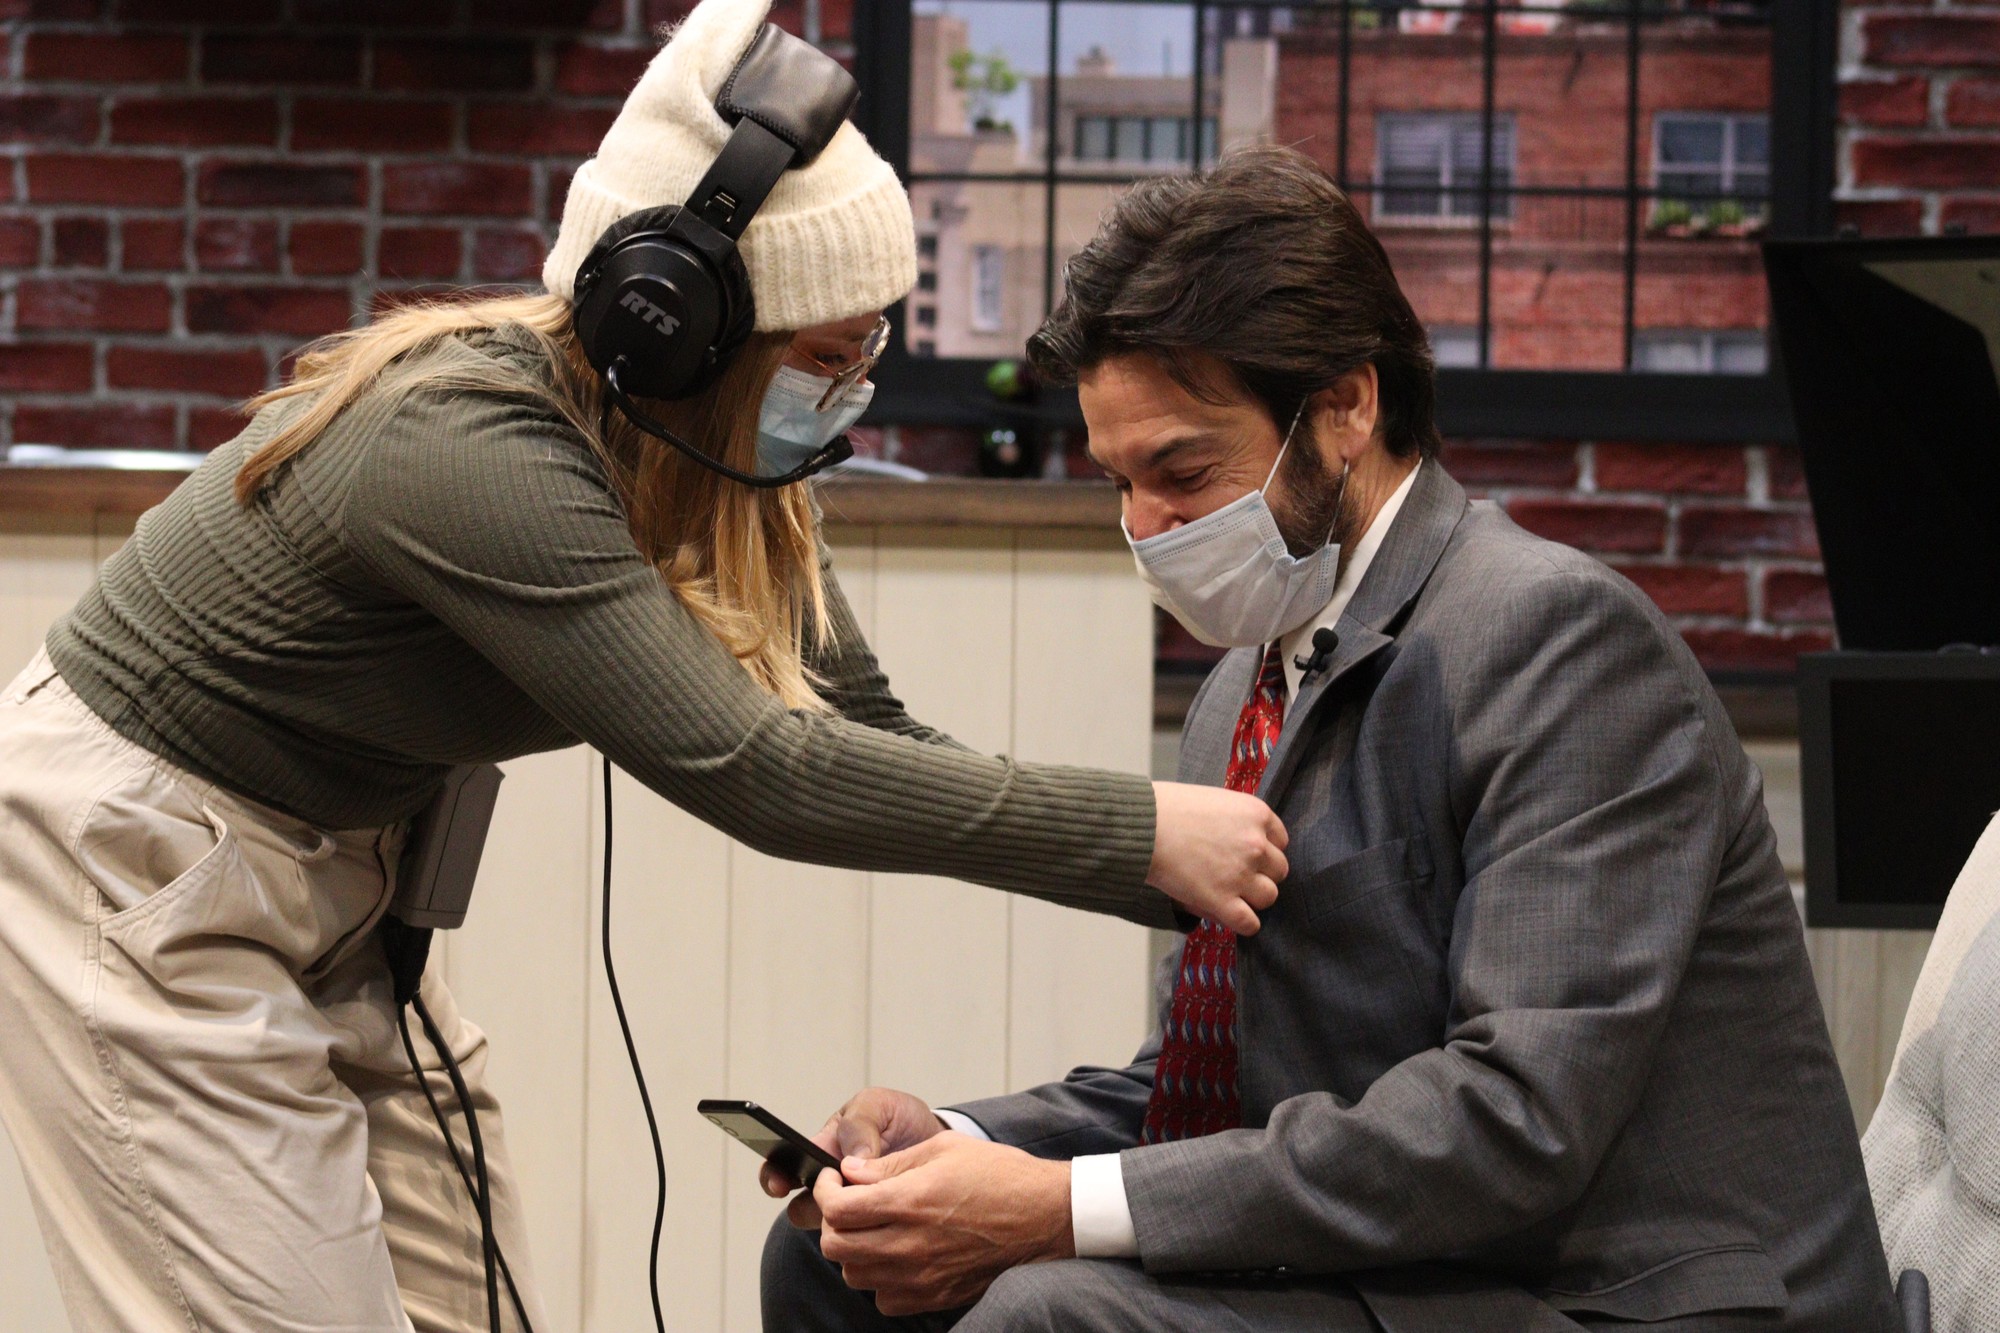 Jess Pochek, a senior film and television major, setting up a microphone on Dr. Koppell before a student meeting while he checks Tik Tok on his phone. John LaRosa